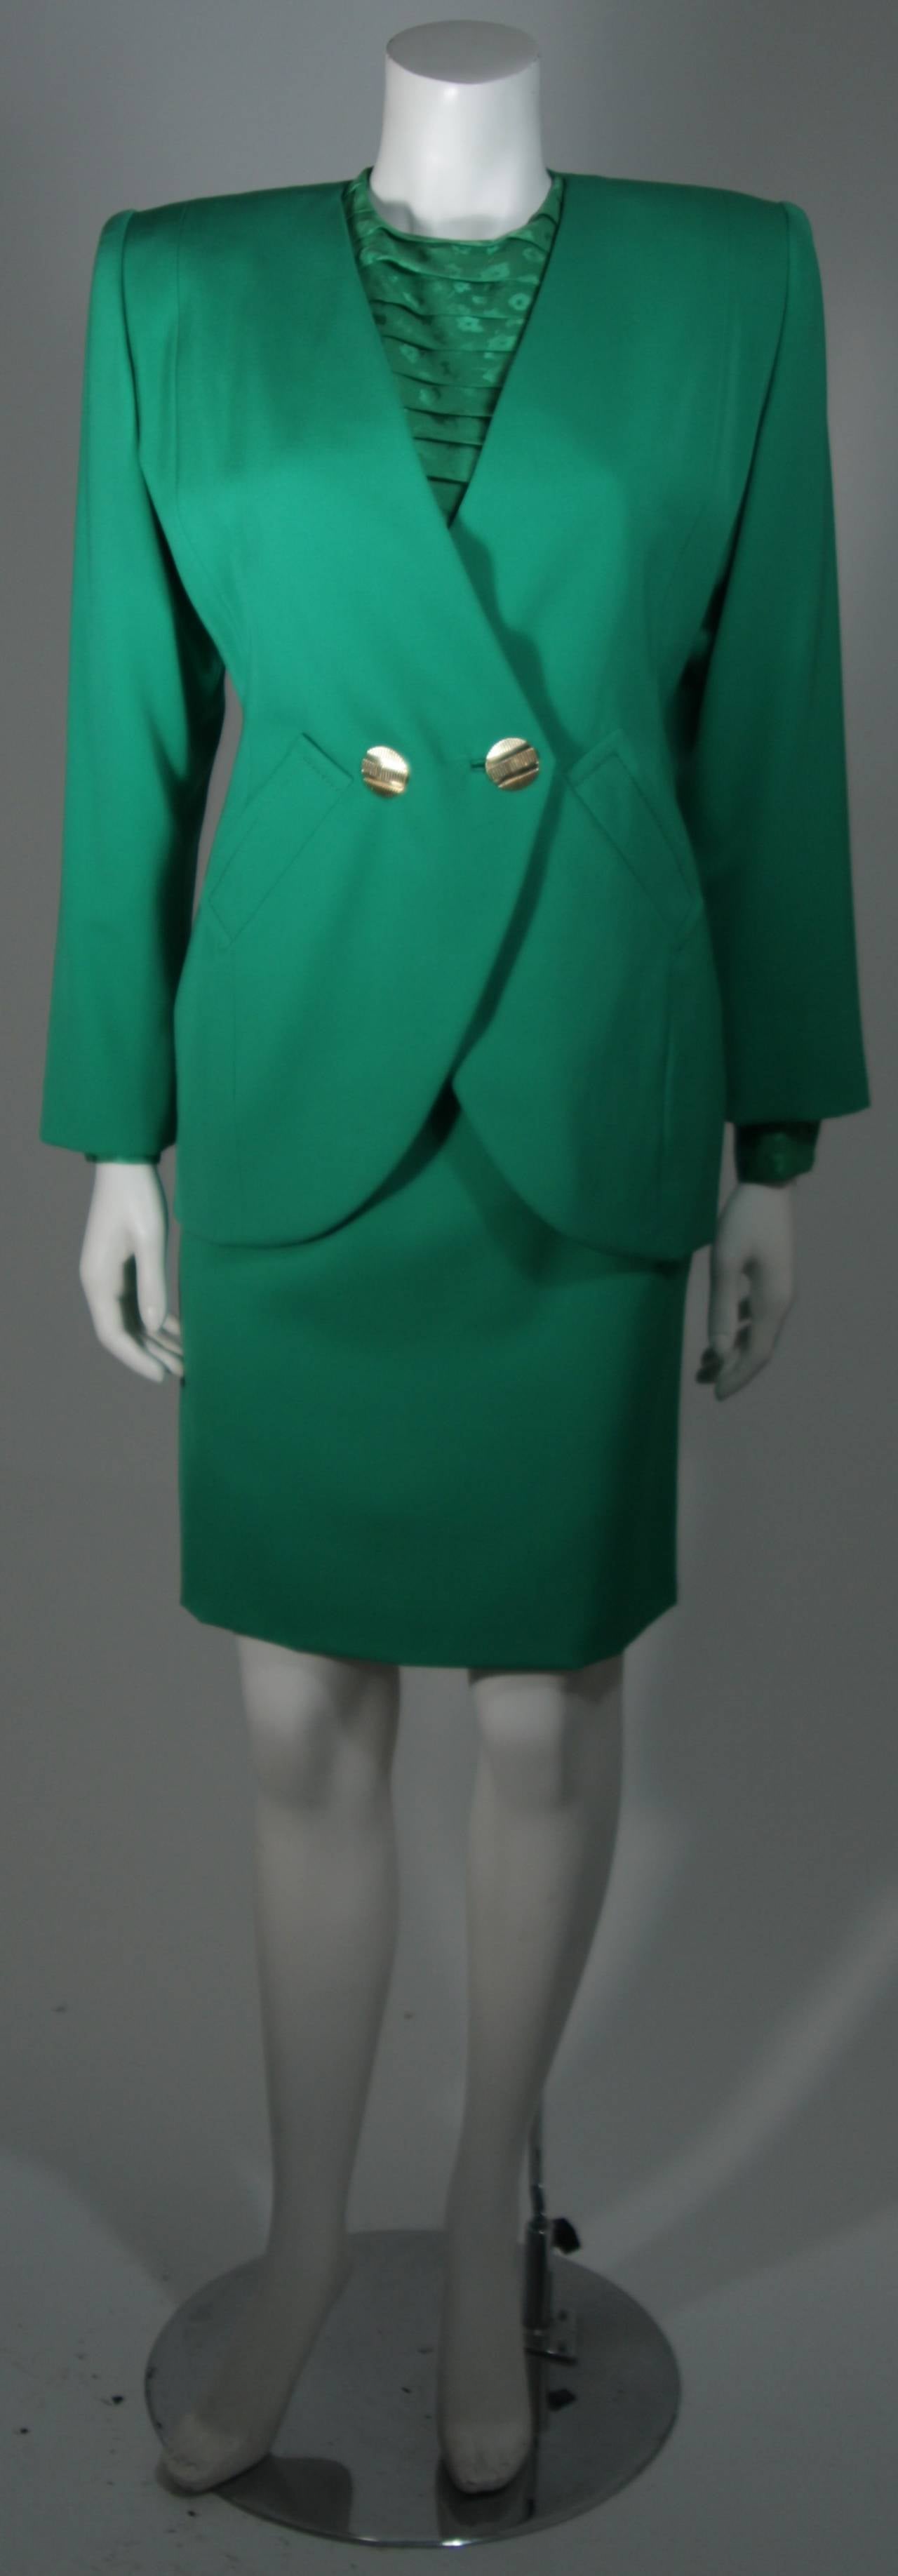 This Galanos Couture design is available for viewing at our Beverly Hills Boutique. We offer a large selection of evening gowns and luxury garments.

This suit is composed of an vibrant true green. The jacket and skirt are composed of wool. The